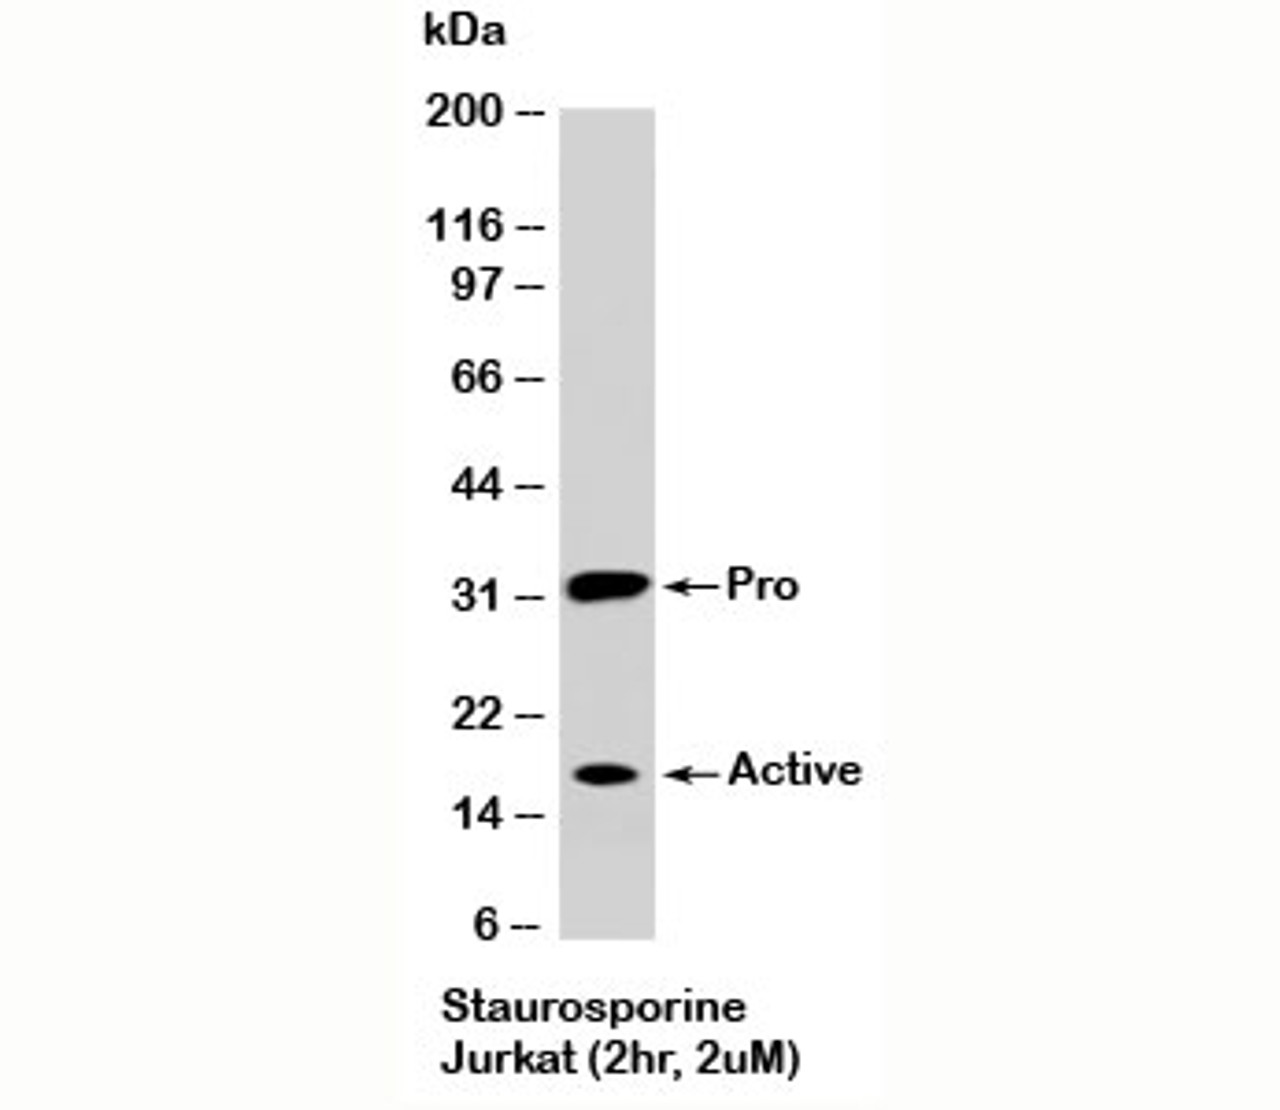 Western blot testing of staurosporine-treated Jurkat cells (2 hr, 2 uM) with Caspase-3 antibody at 2ug/ml. The pro form is seen at ~32kD and active caspase-3 seen at ~17kD and ~12kD.